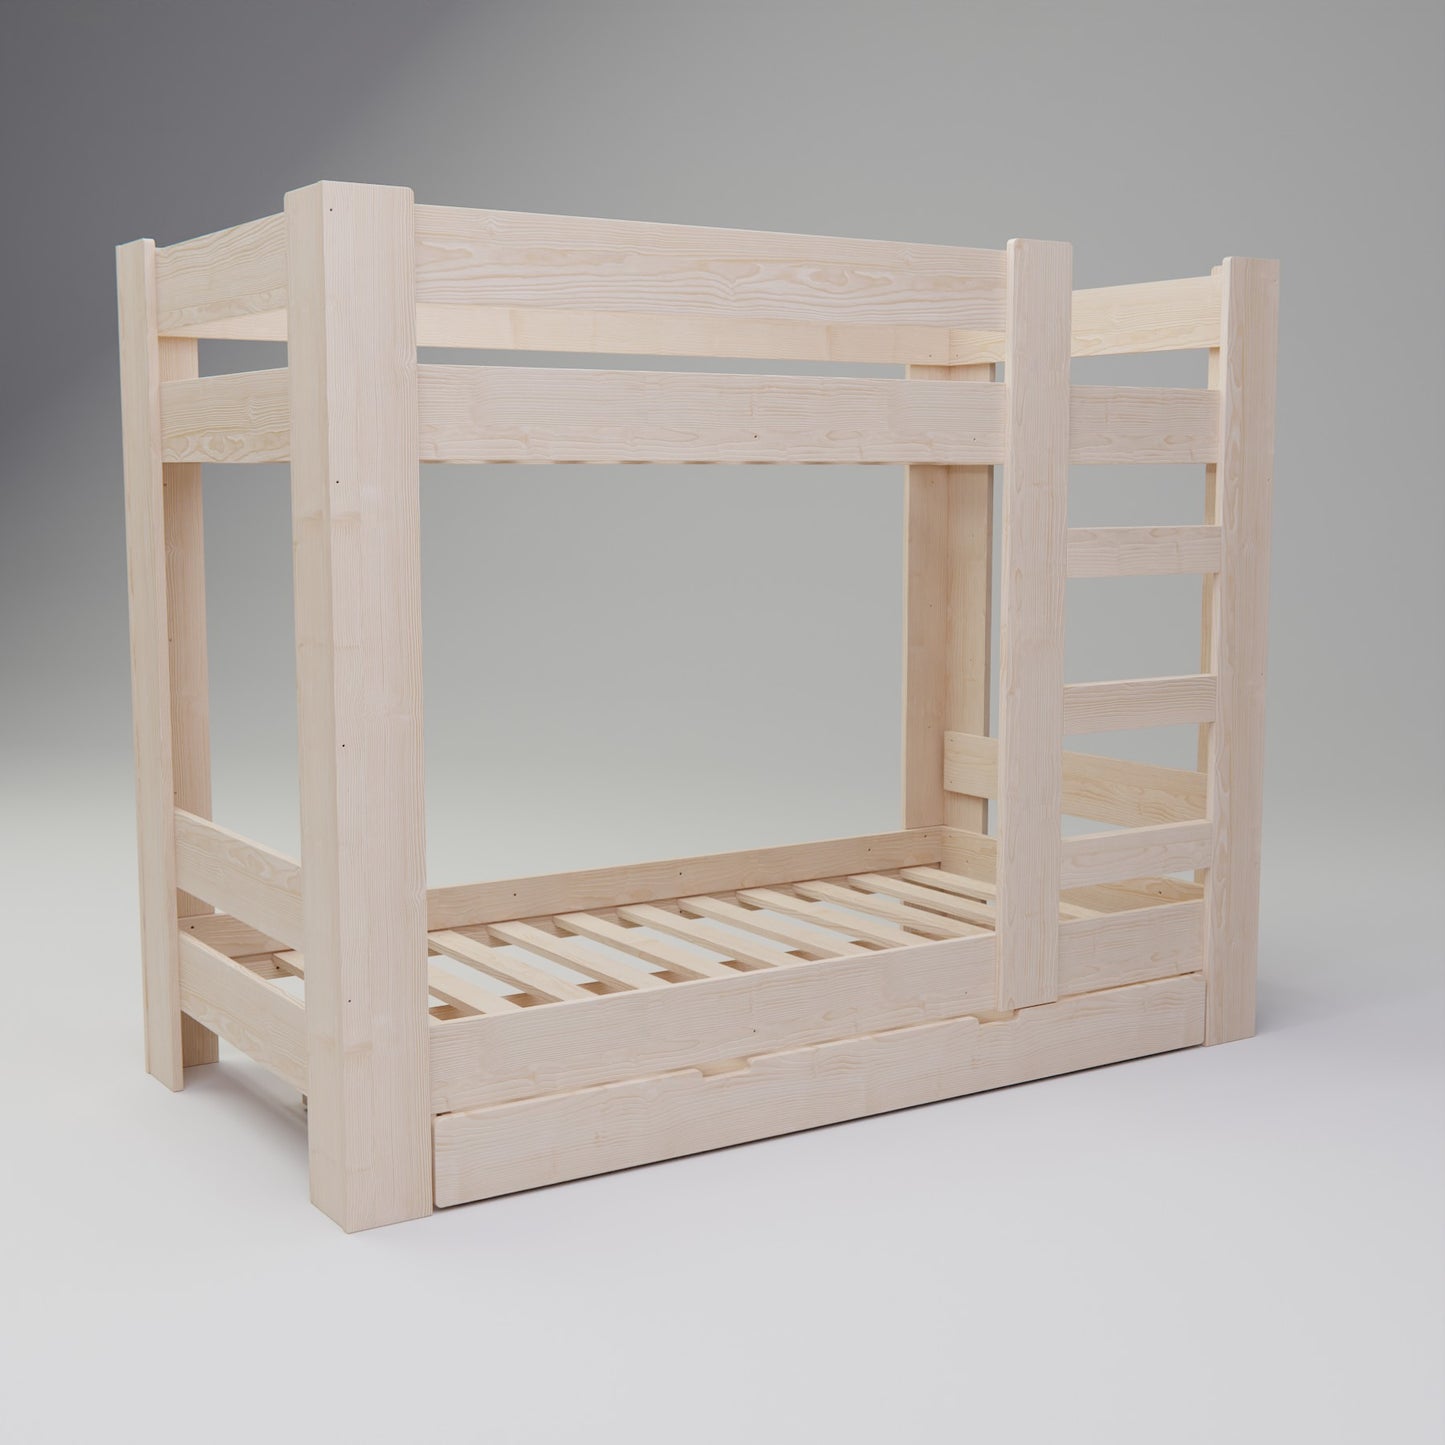 Wooden kids bunk bed with drawer from NZ Pine Auckland New Zealand